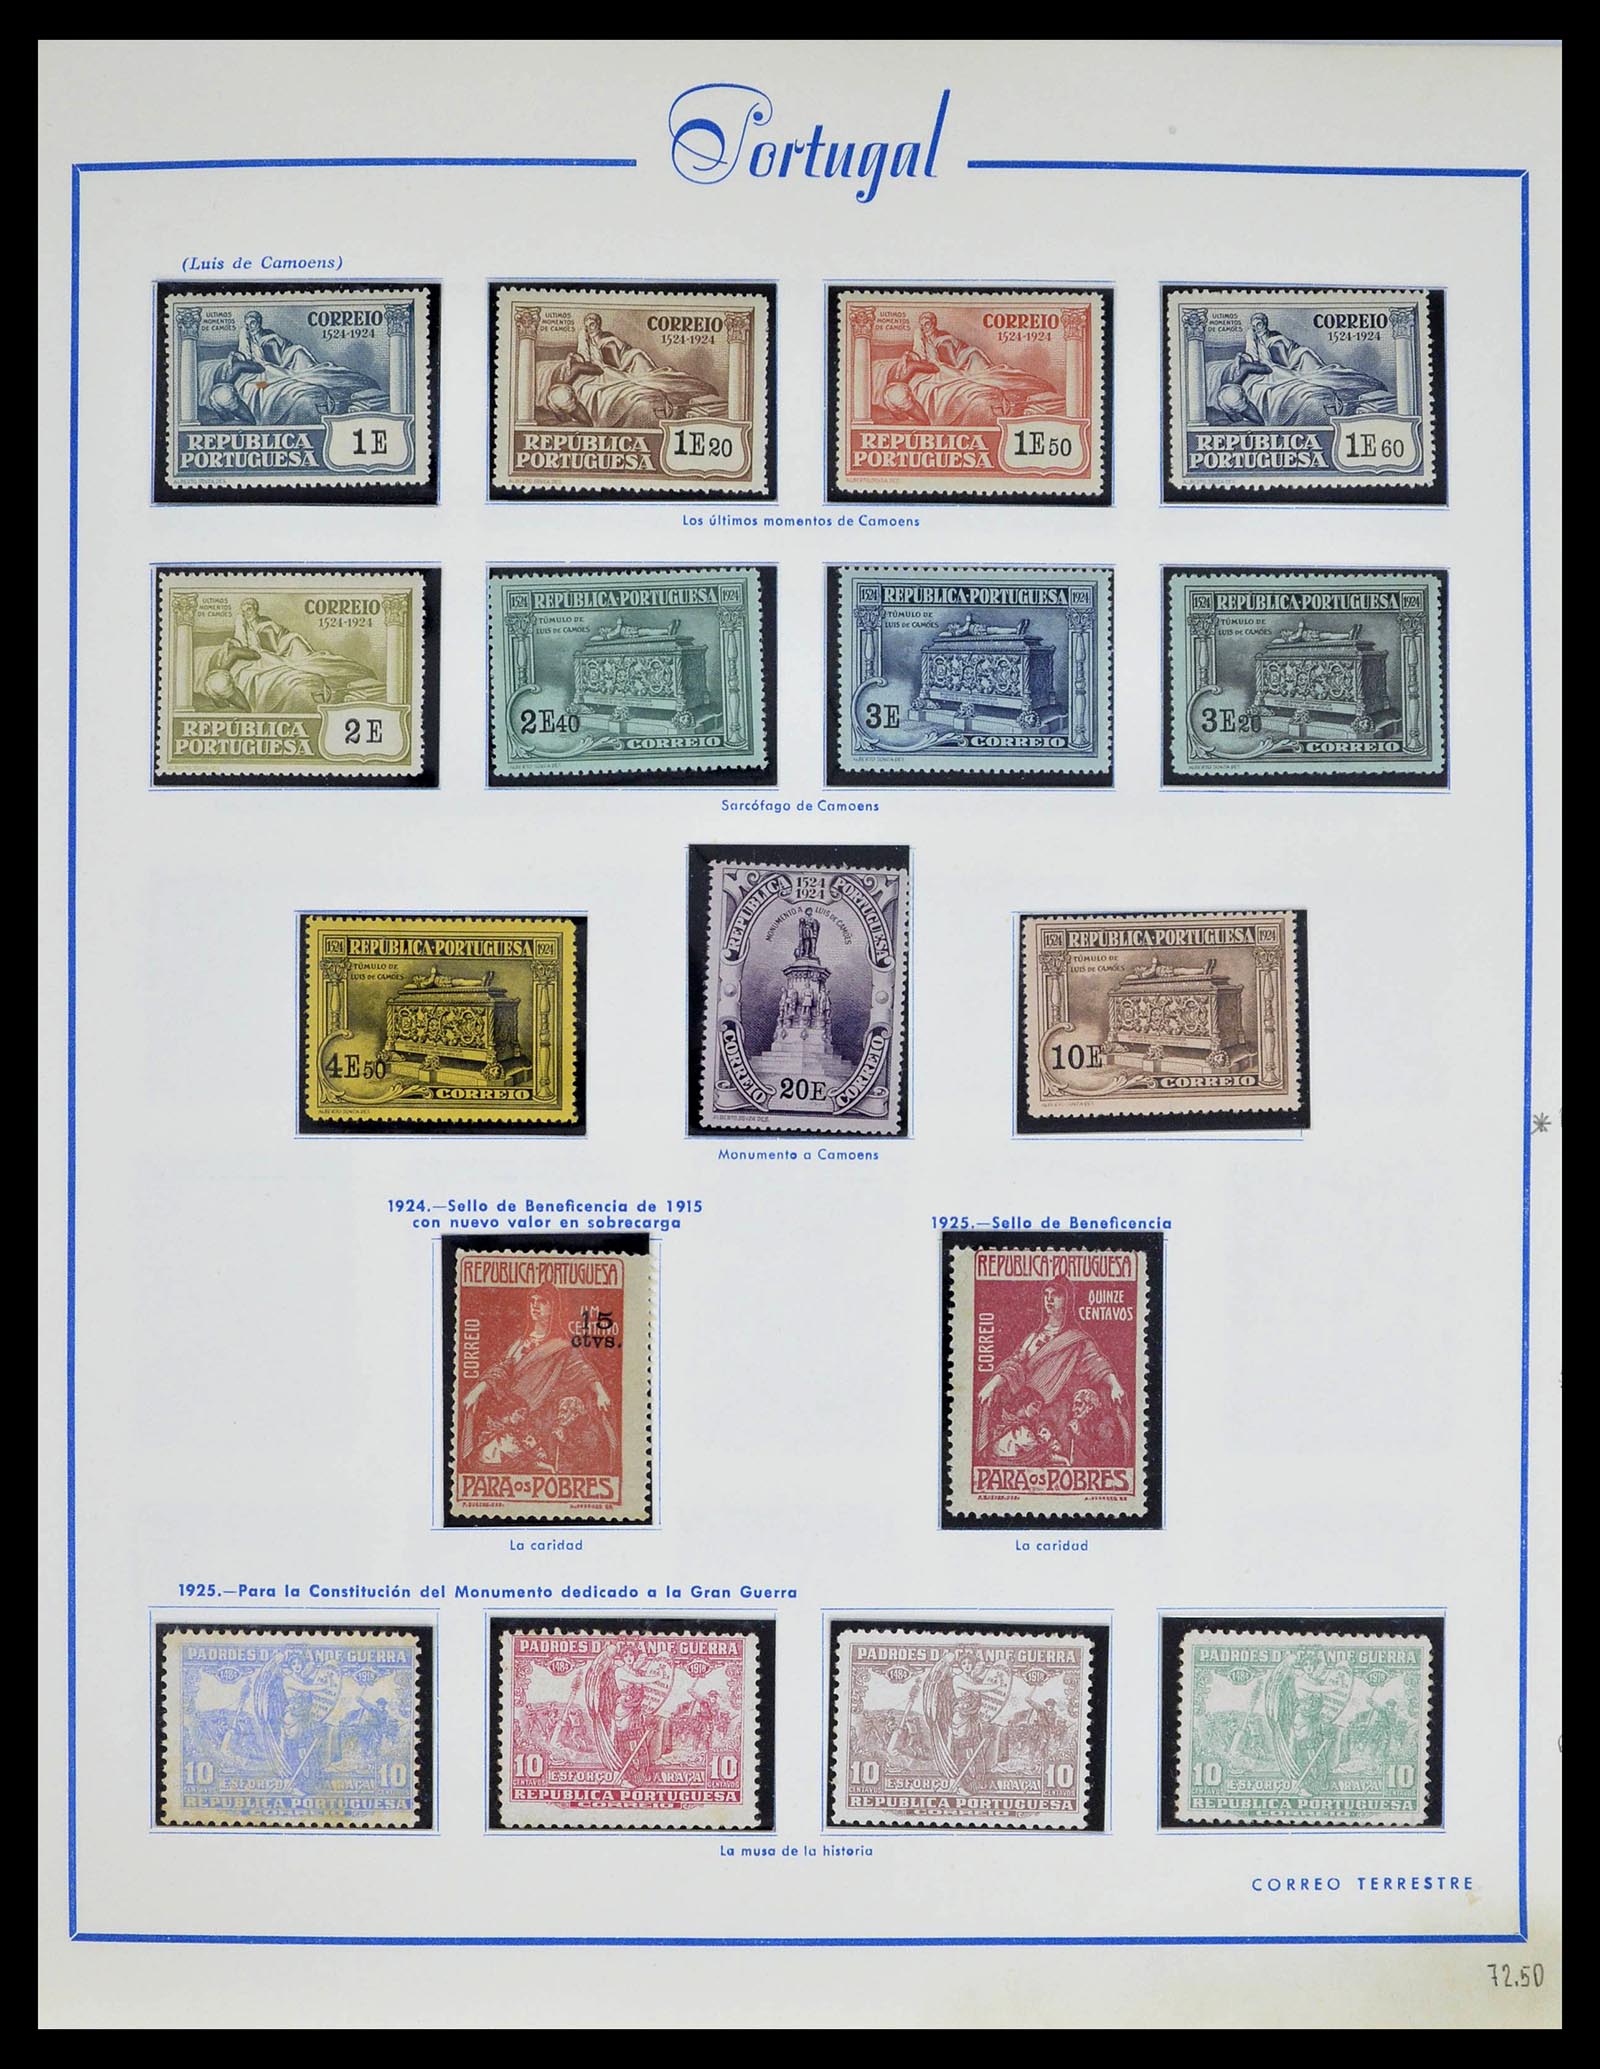 39233 0016 - Stamp collection 39233 Portugal 1853-1978.